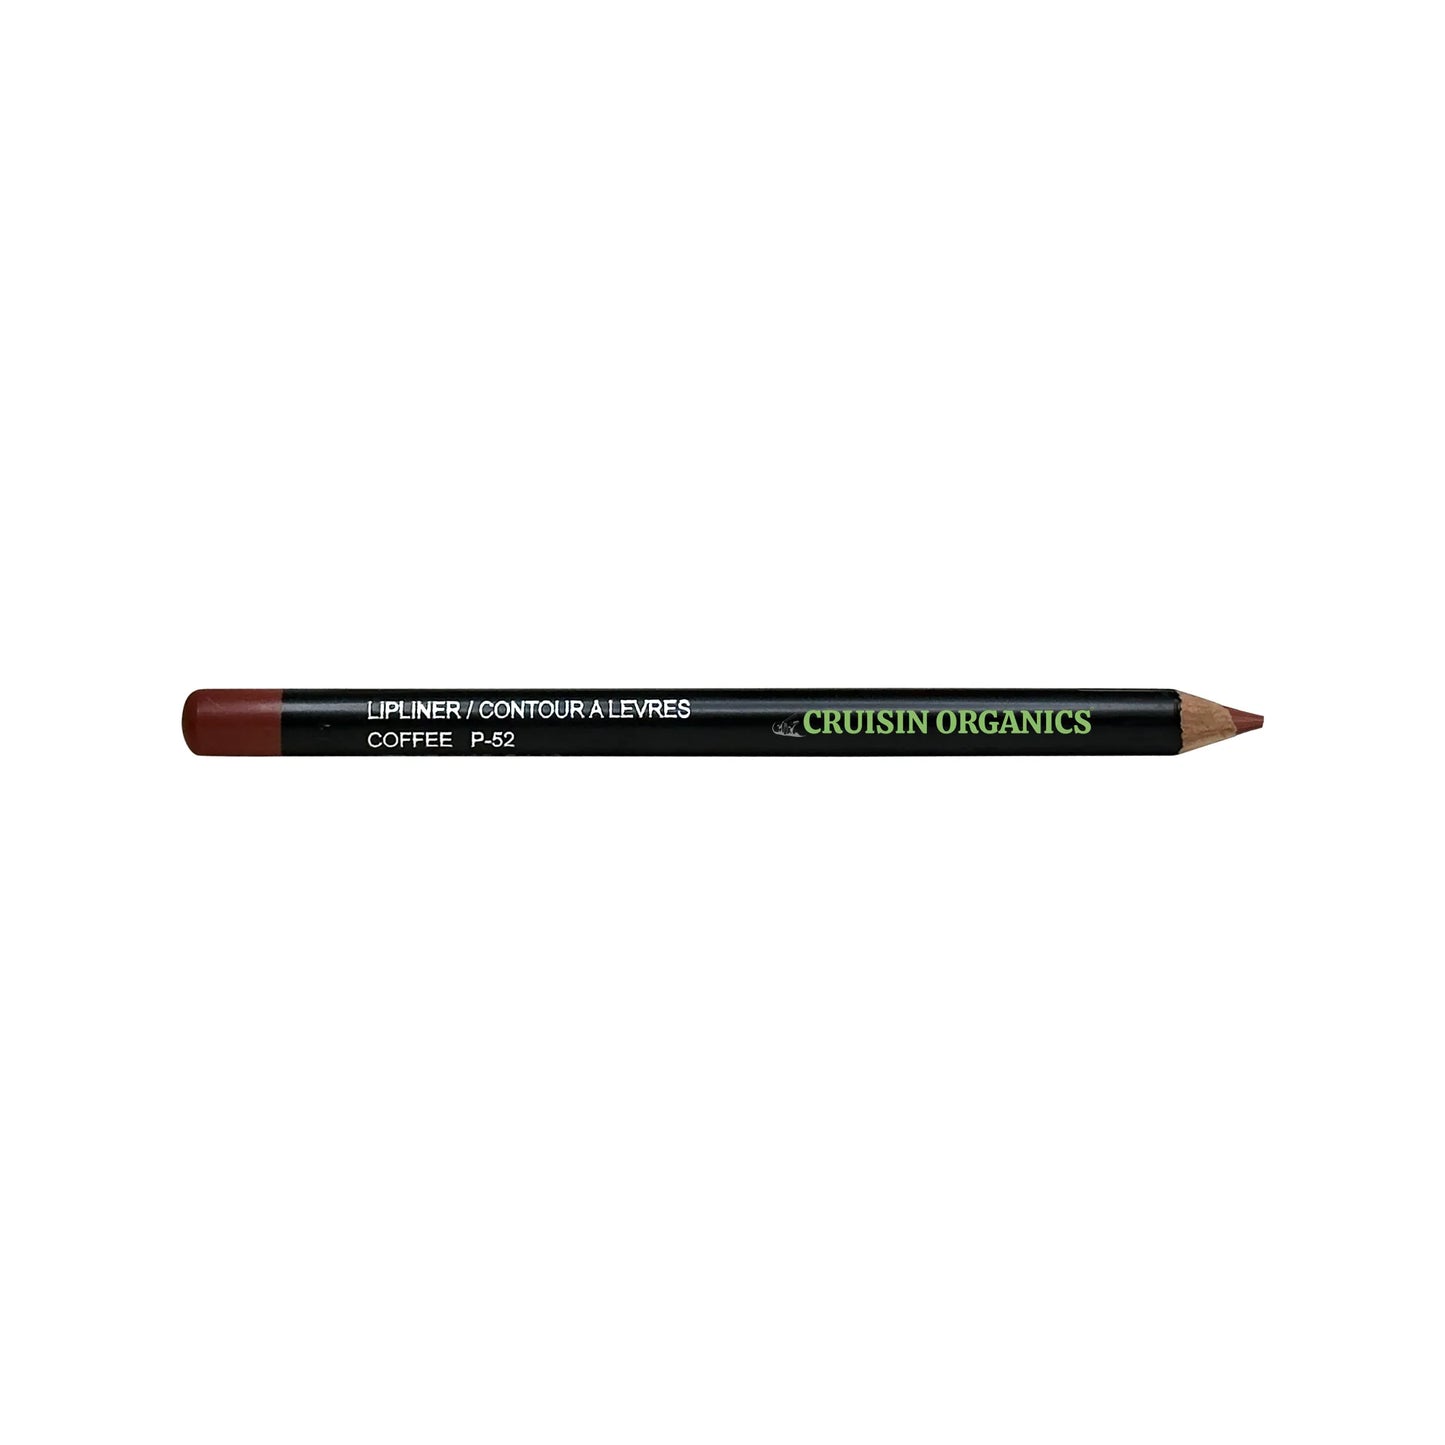 Indulgent and bold colors of Cruisin Organics Coffee Lip Liner. With long-lasting definition, this liner adds a touch of sophistication to your lip look. A must-have for any makeup lover, the art-inspired pigments will elevate your makeup game. Glide on and feel luxurious all day.